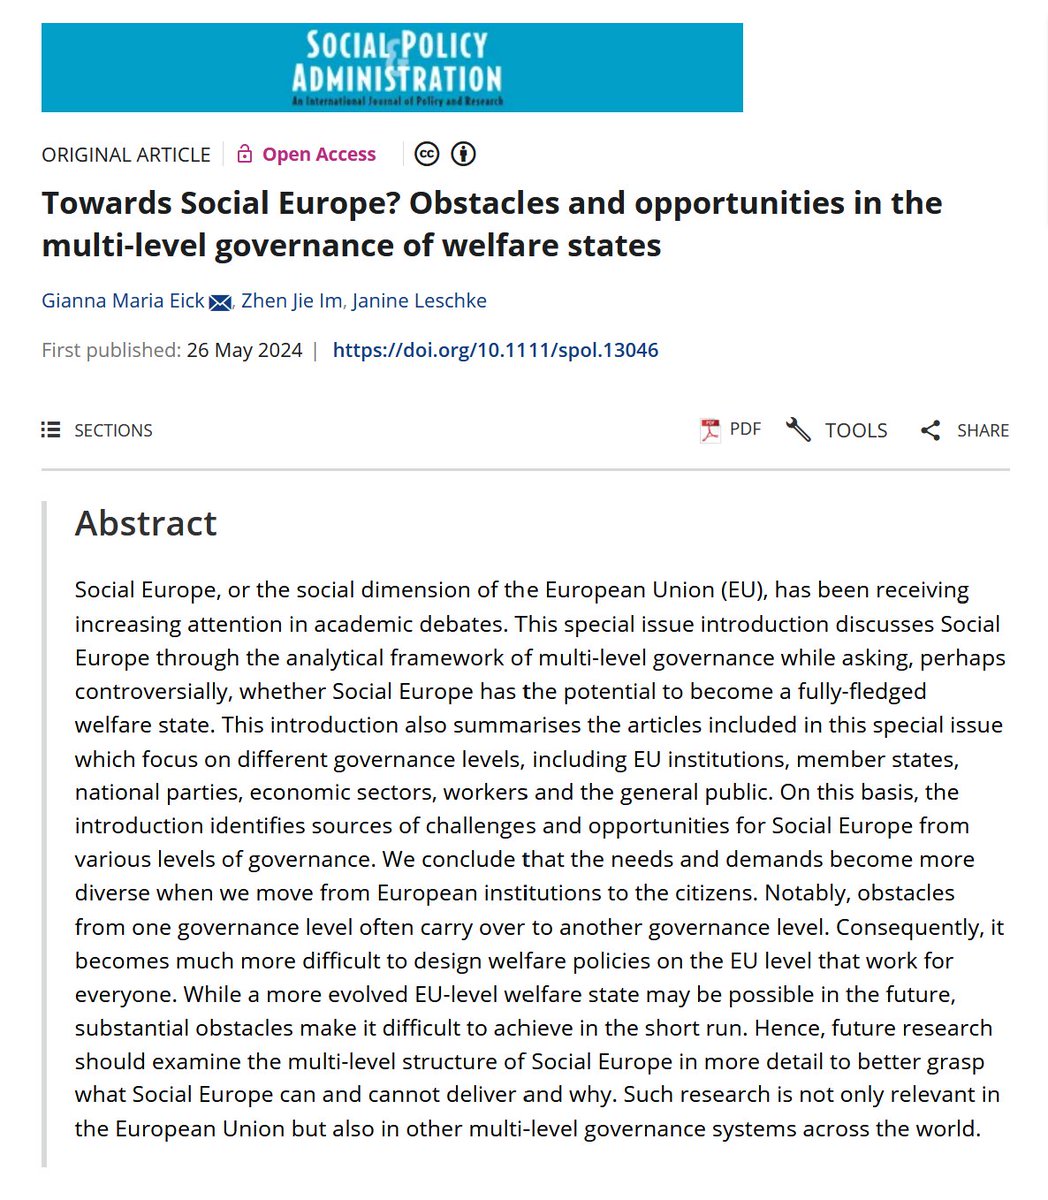 Just in time for #EP2024 @zhen_j_im, Janine Leschke and I published a special issue @spaajournal on the obstacles and opportunities for welfare policy on the EU level with 9 articles 🇪🇺 Thanks to all contributors! ⭐️ onlinelibrary.wiley.com/doi/10.1111/sp…